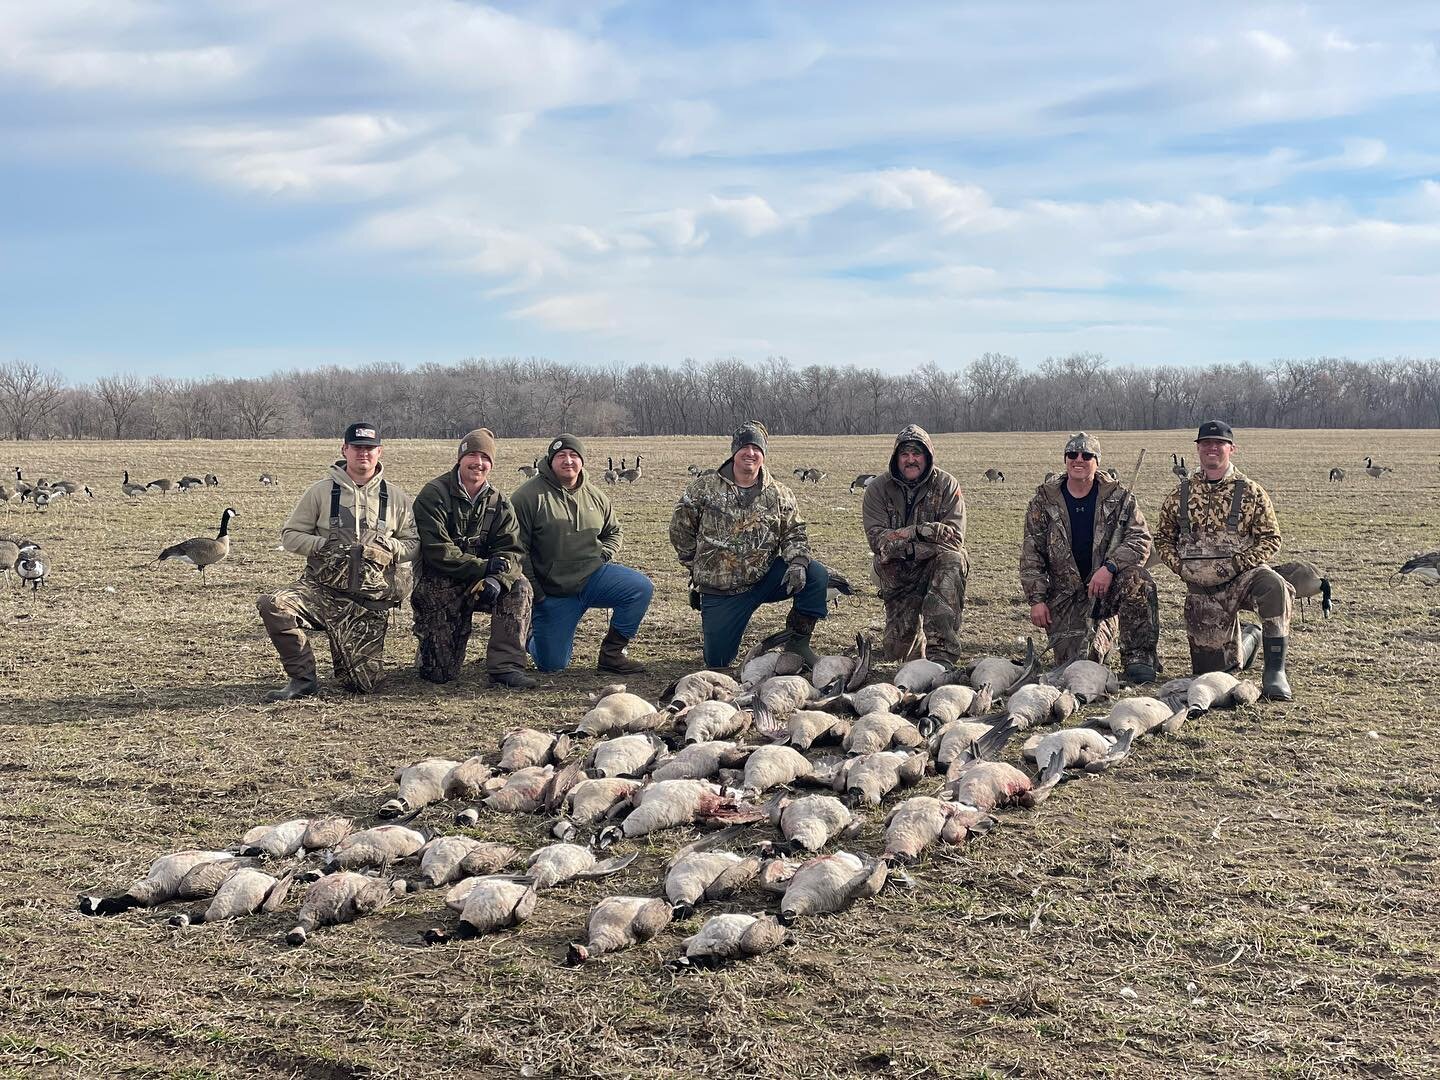 Don't miss out on the hunting adventure of a lifetime! Our available dates for the 2023/2024 hunting season are filling up fast, and we don't want you to miss your chance to experience the thrill of the hunt with us. Book now to secure your spot and 